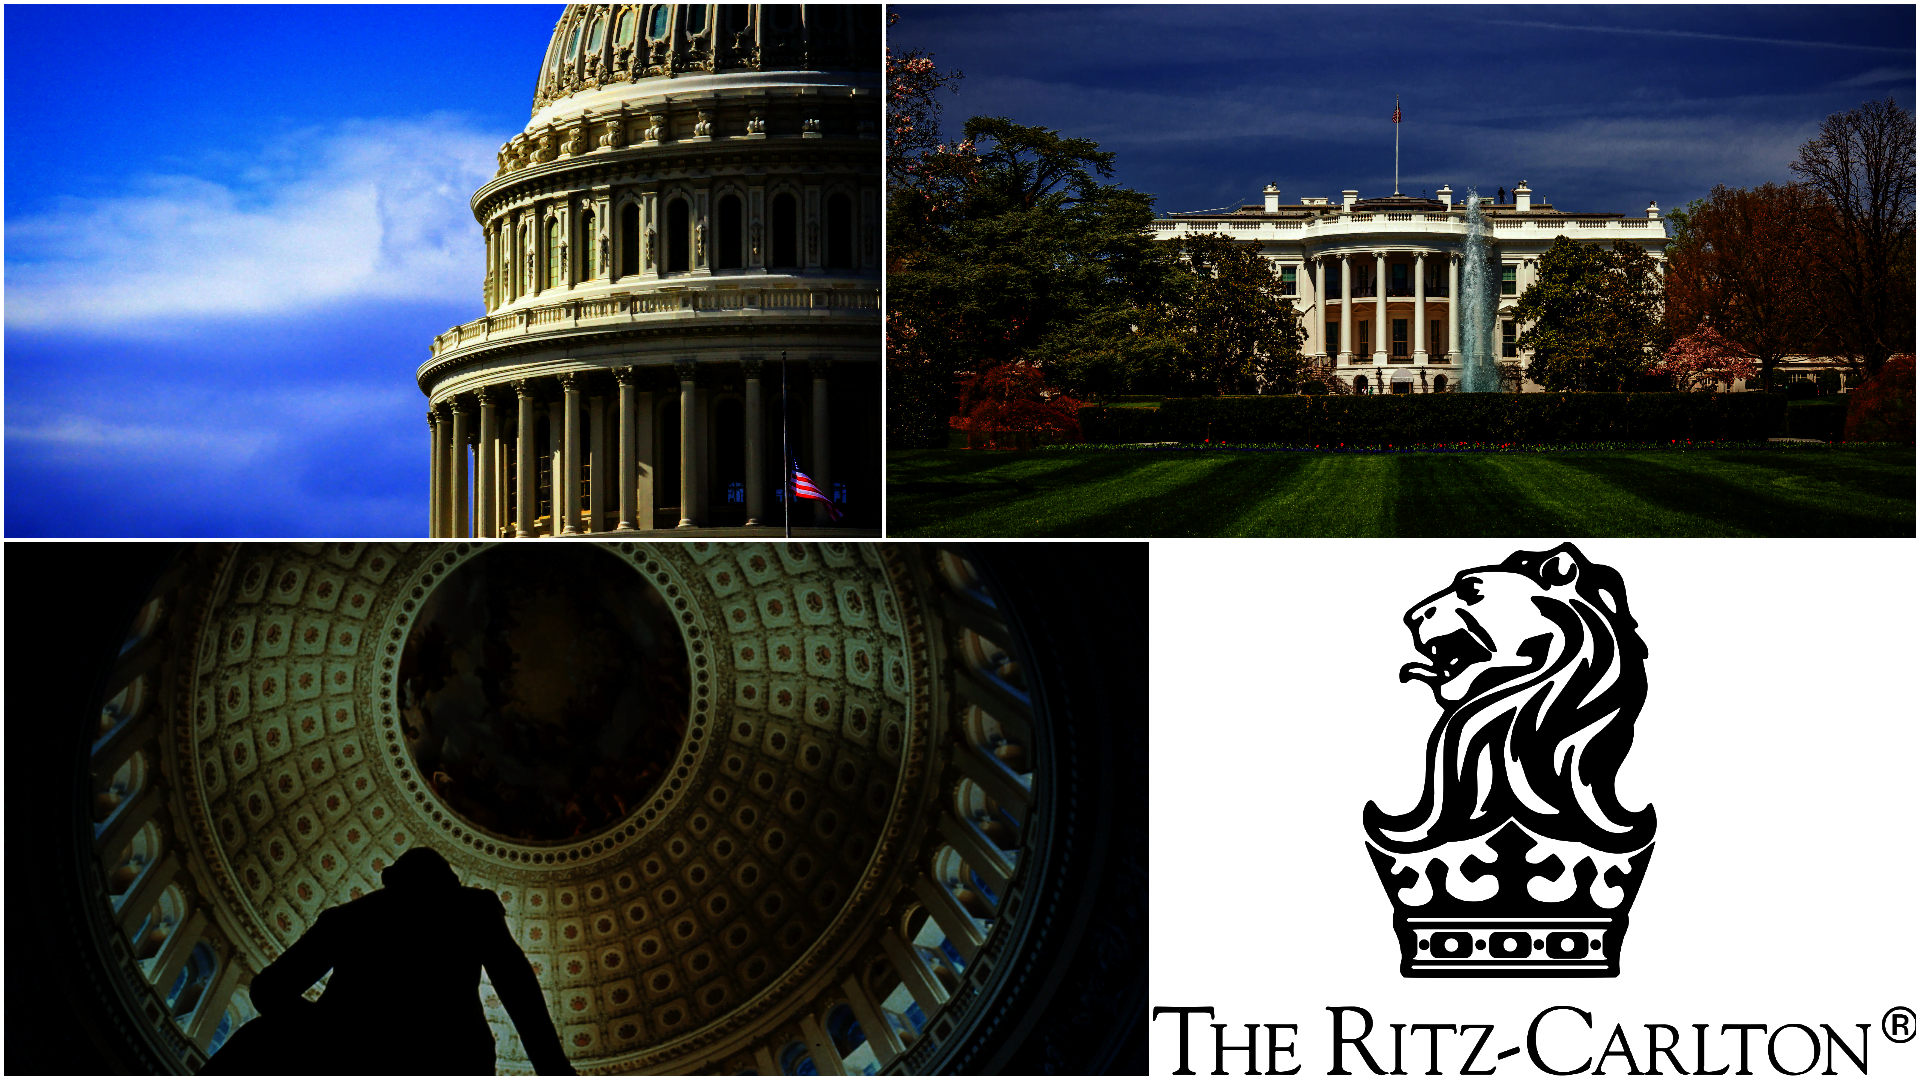 The Ritz-Carlton Offers Two Over-The-Top Inauguration Experiences